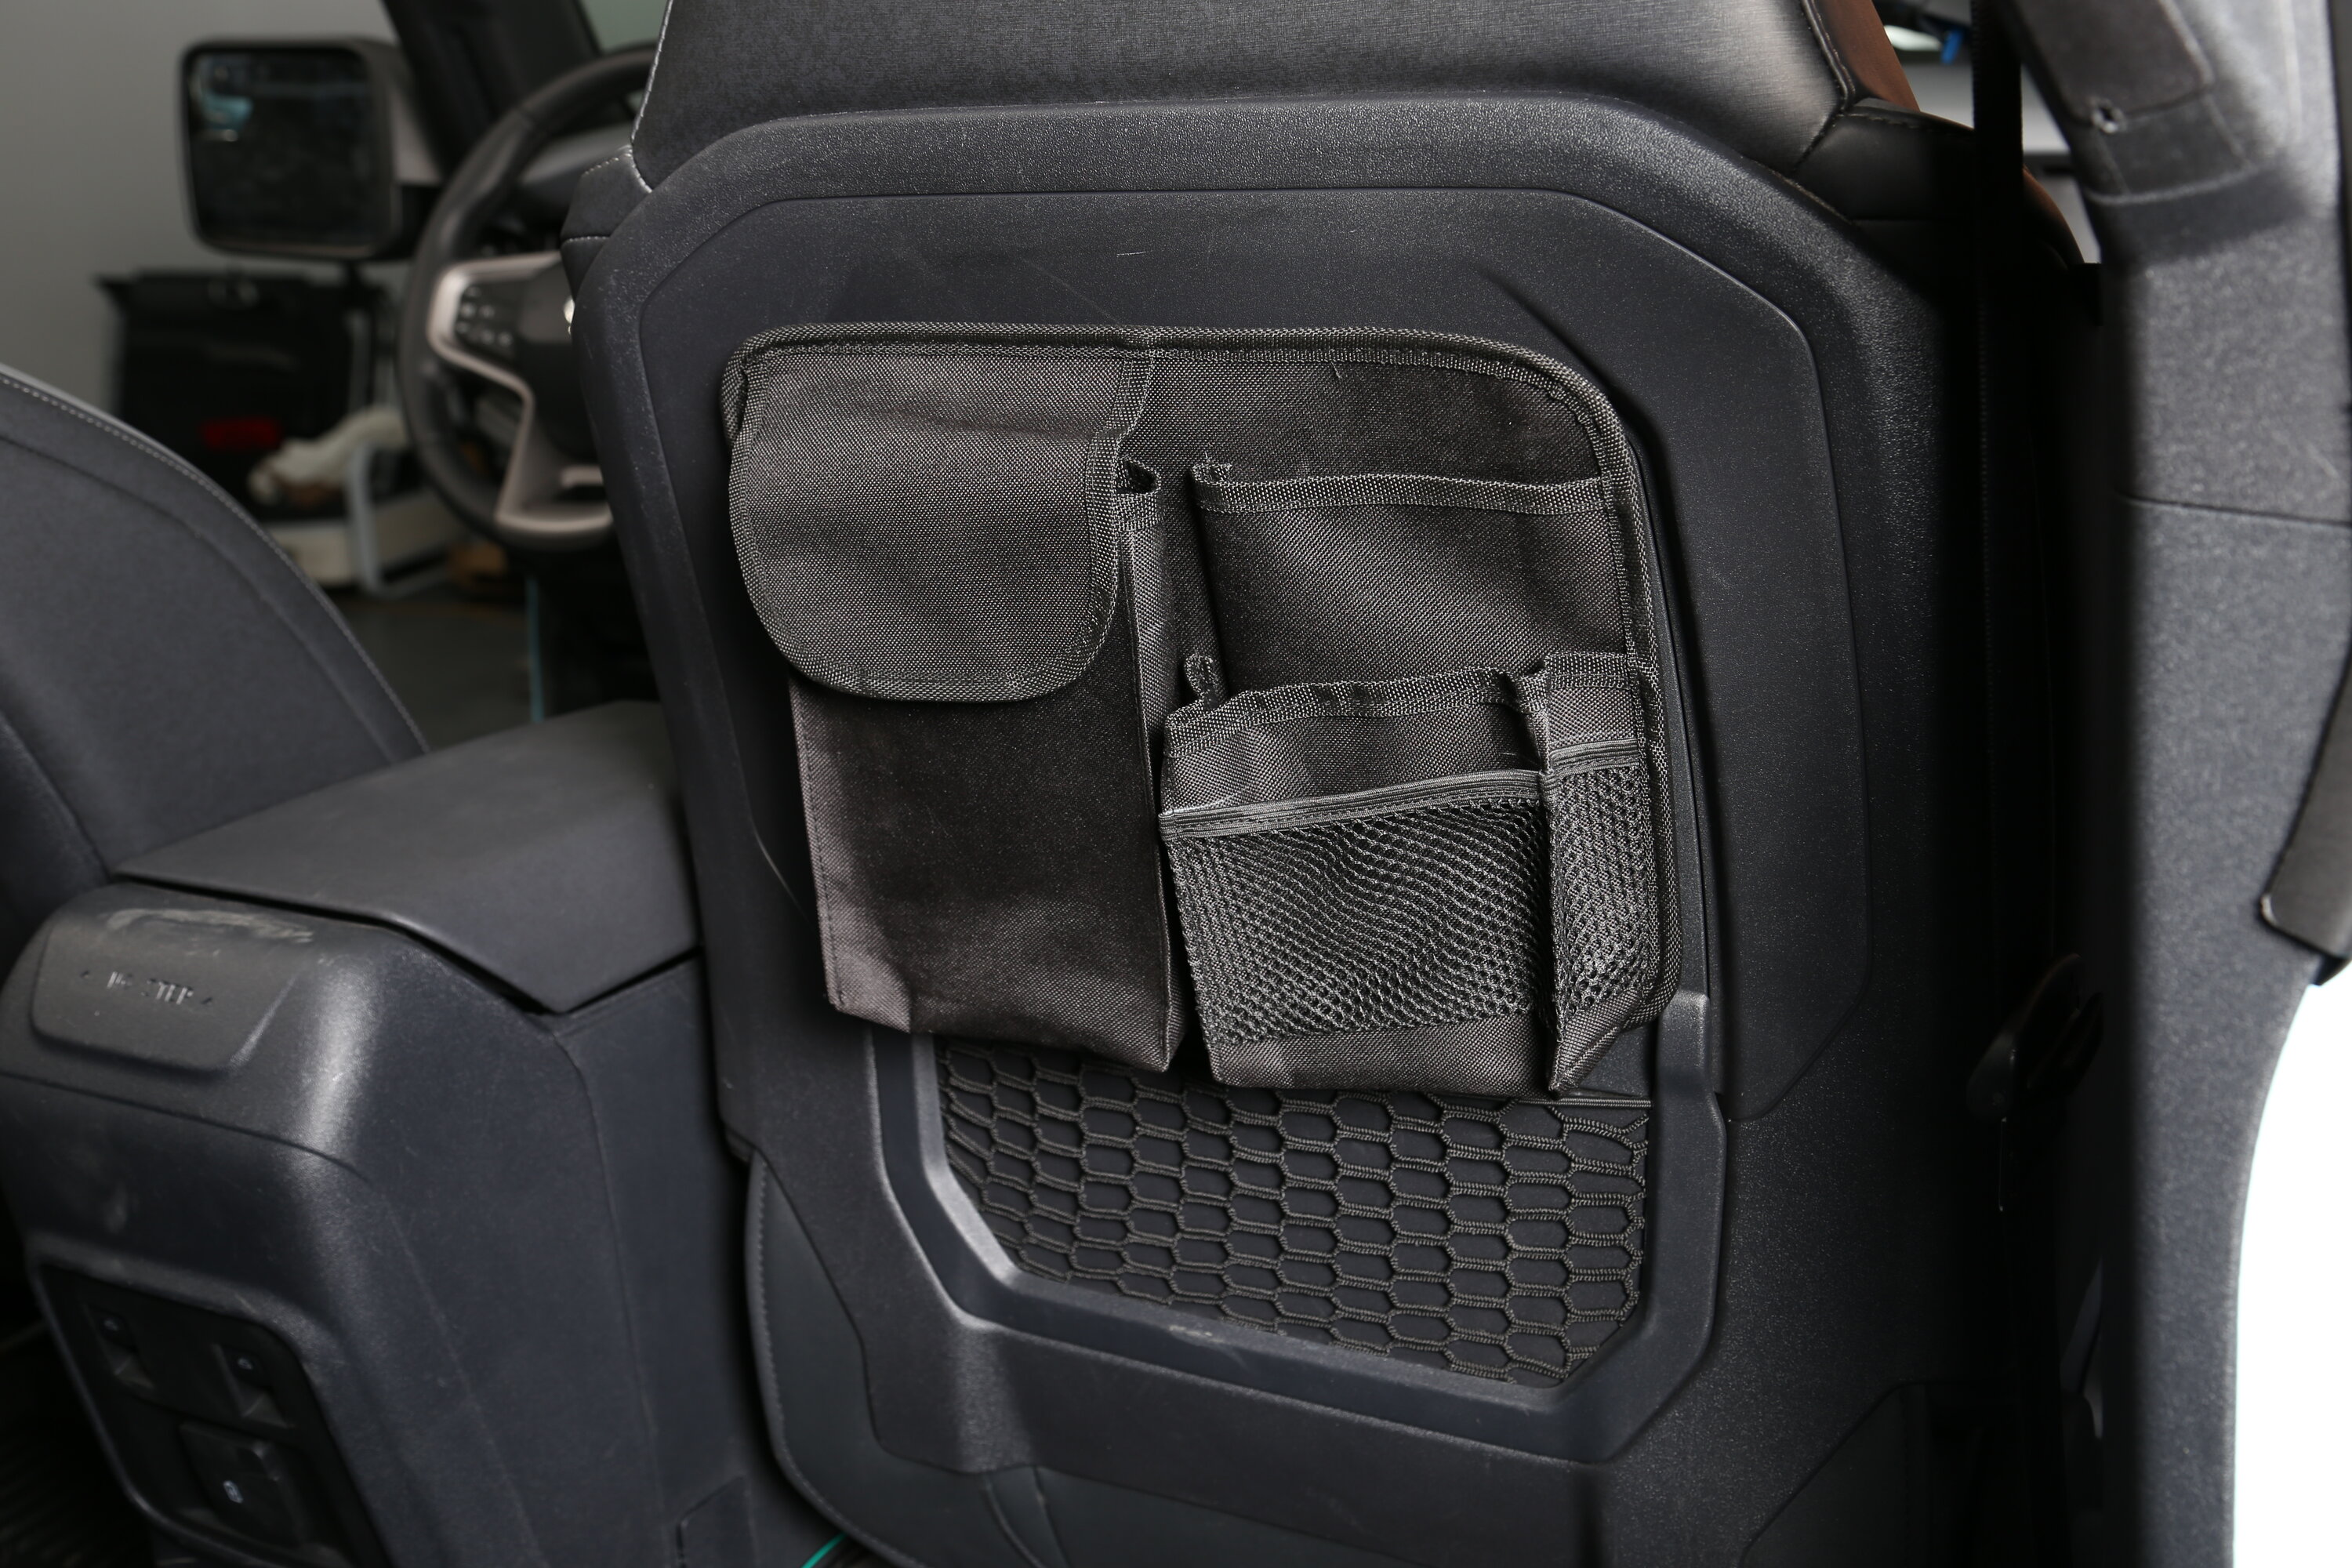 Ford Bronco Back of Front Seat Organizer Available Now IMG_2105.JPG